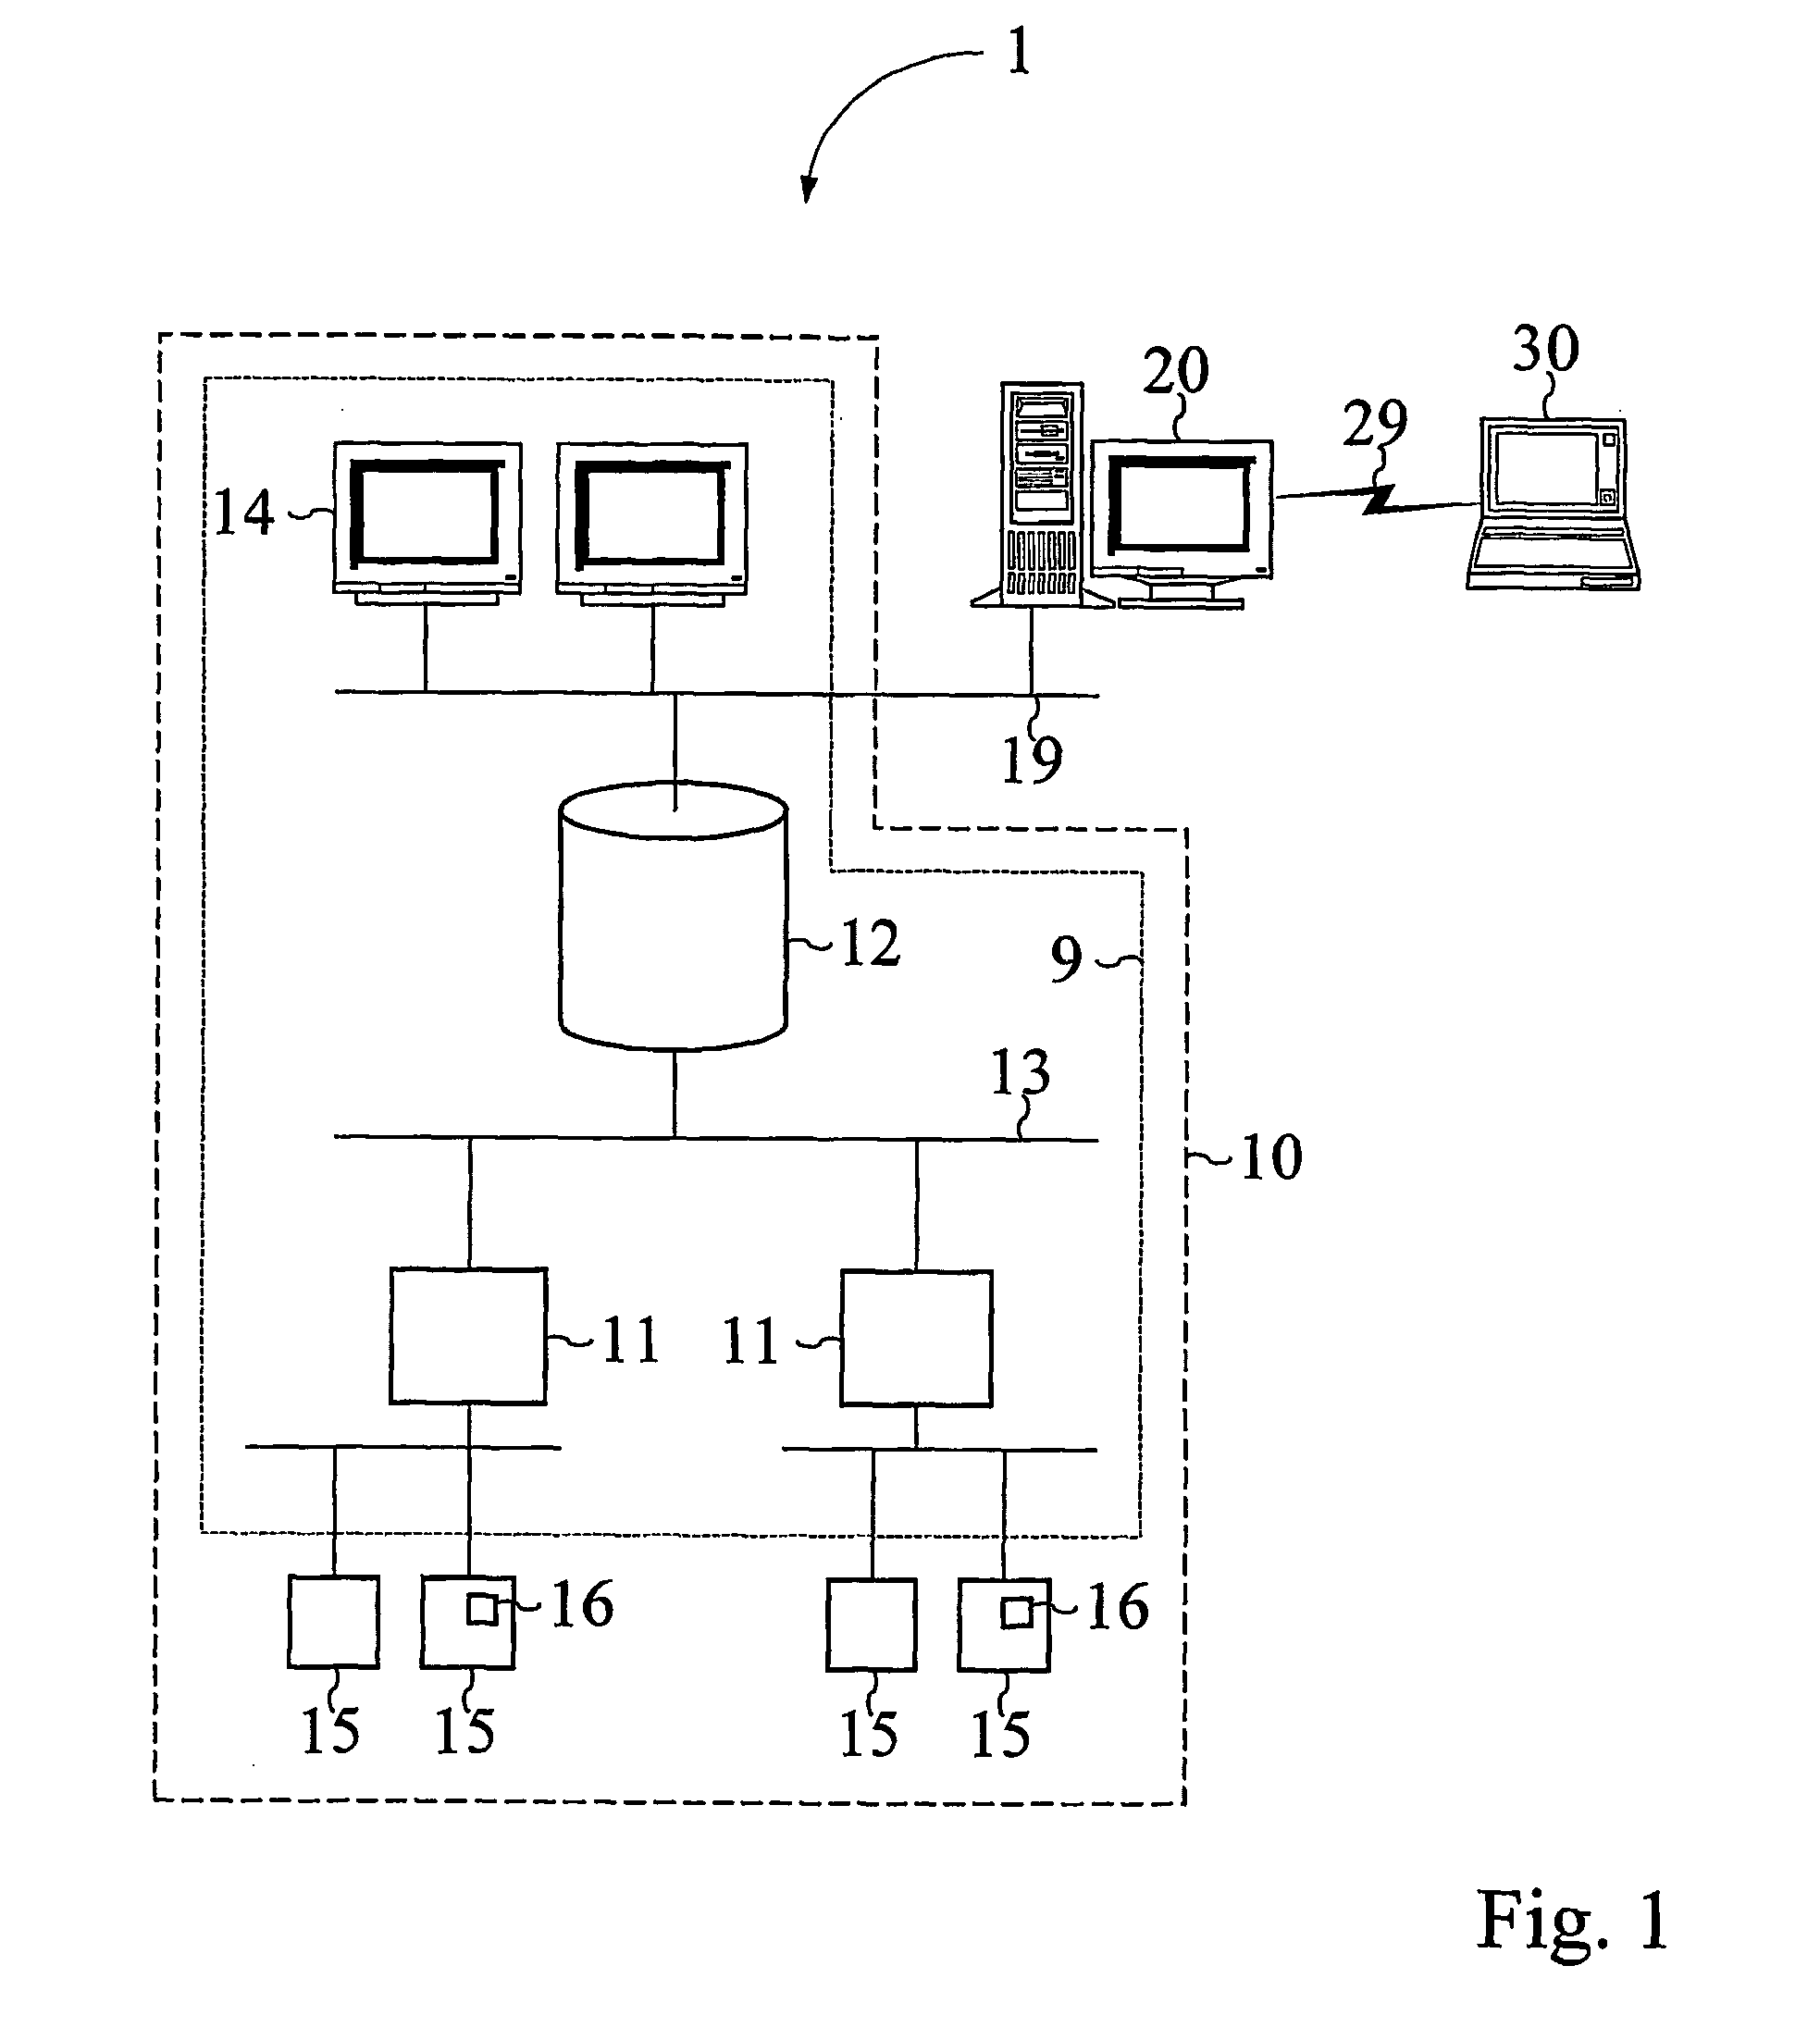 System apparatus and method for diagnosing a flow system